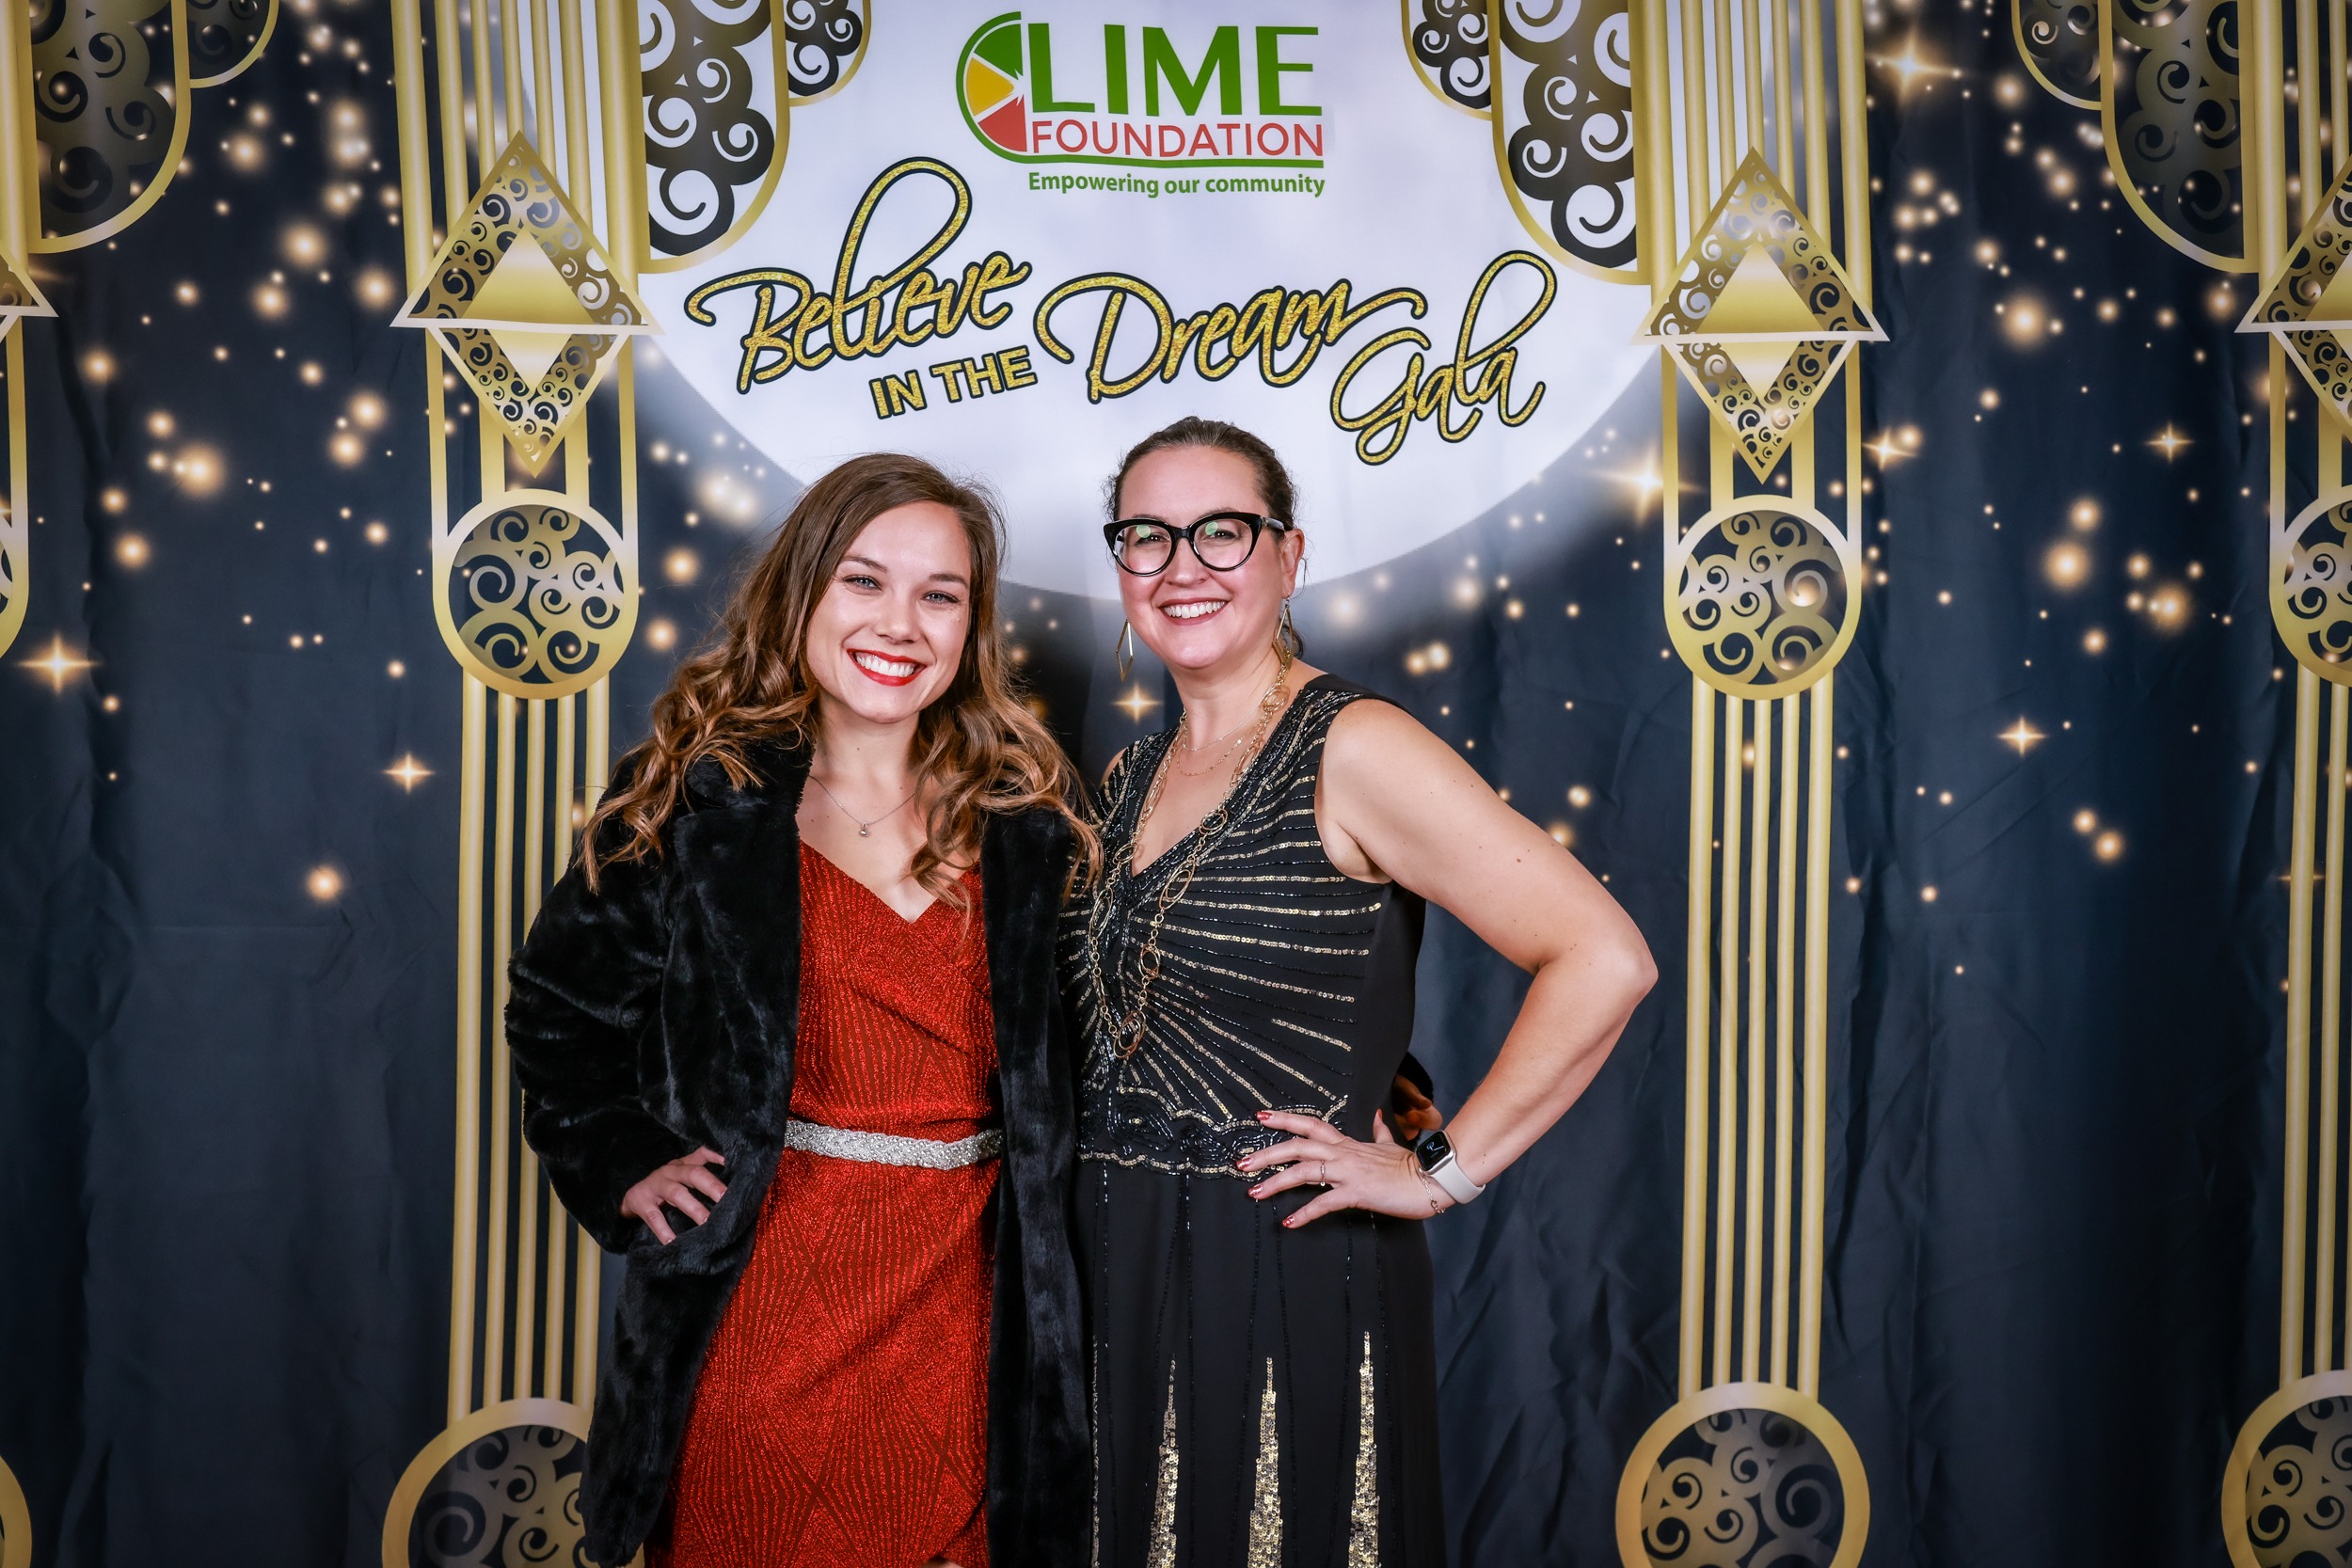 Two women posing for a photo in front of a gilded backdrop at The LIME Foundation in Santa Rosa.